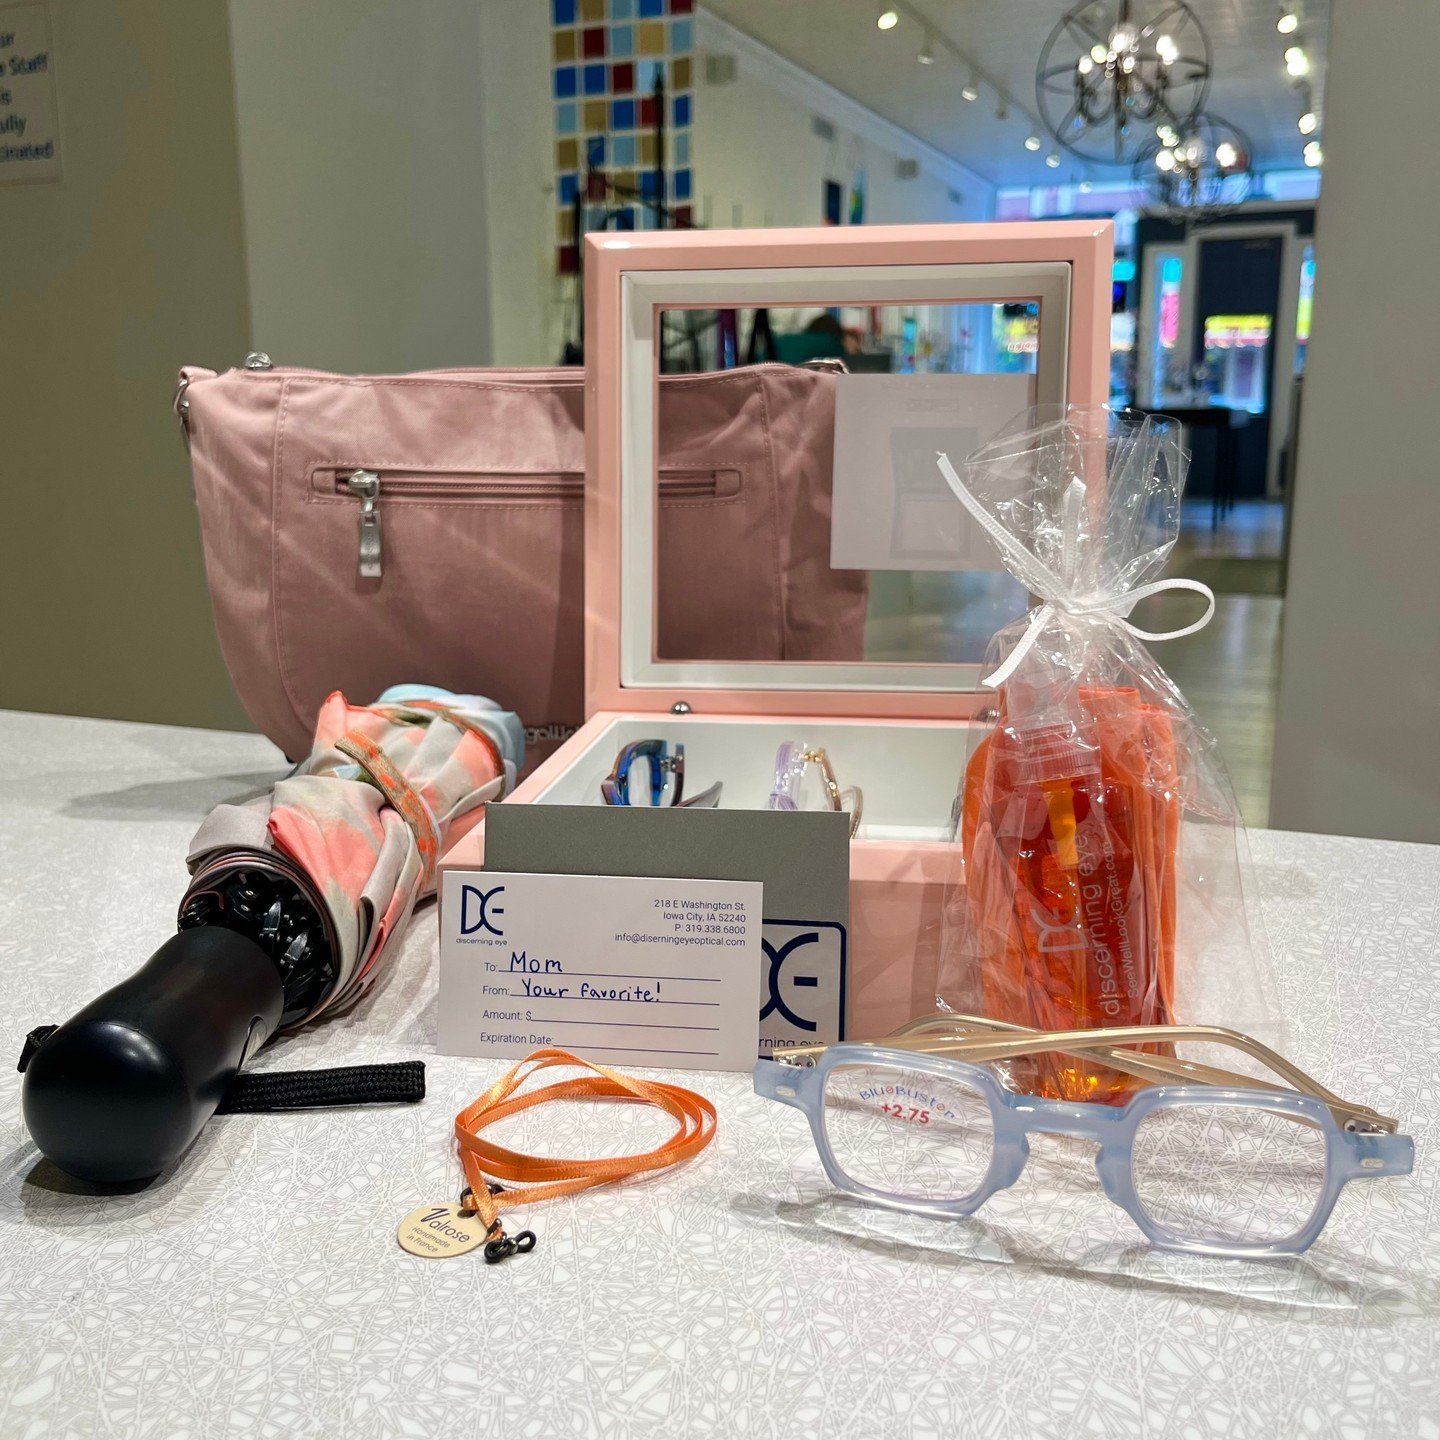 Mother's Day is fast approaching... We have so many great gift options for the eyewear lover in your family! ⁠
⁠
DE Gift Certificate, Oyobox Eyewear Organizer, Baggallini Purses, EyeOs Reading Glasses &amp; more!